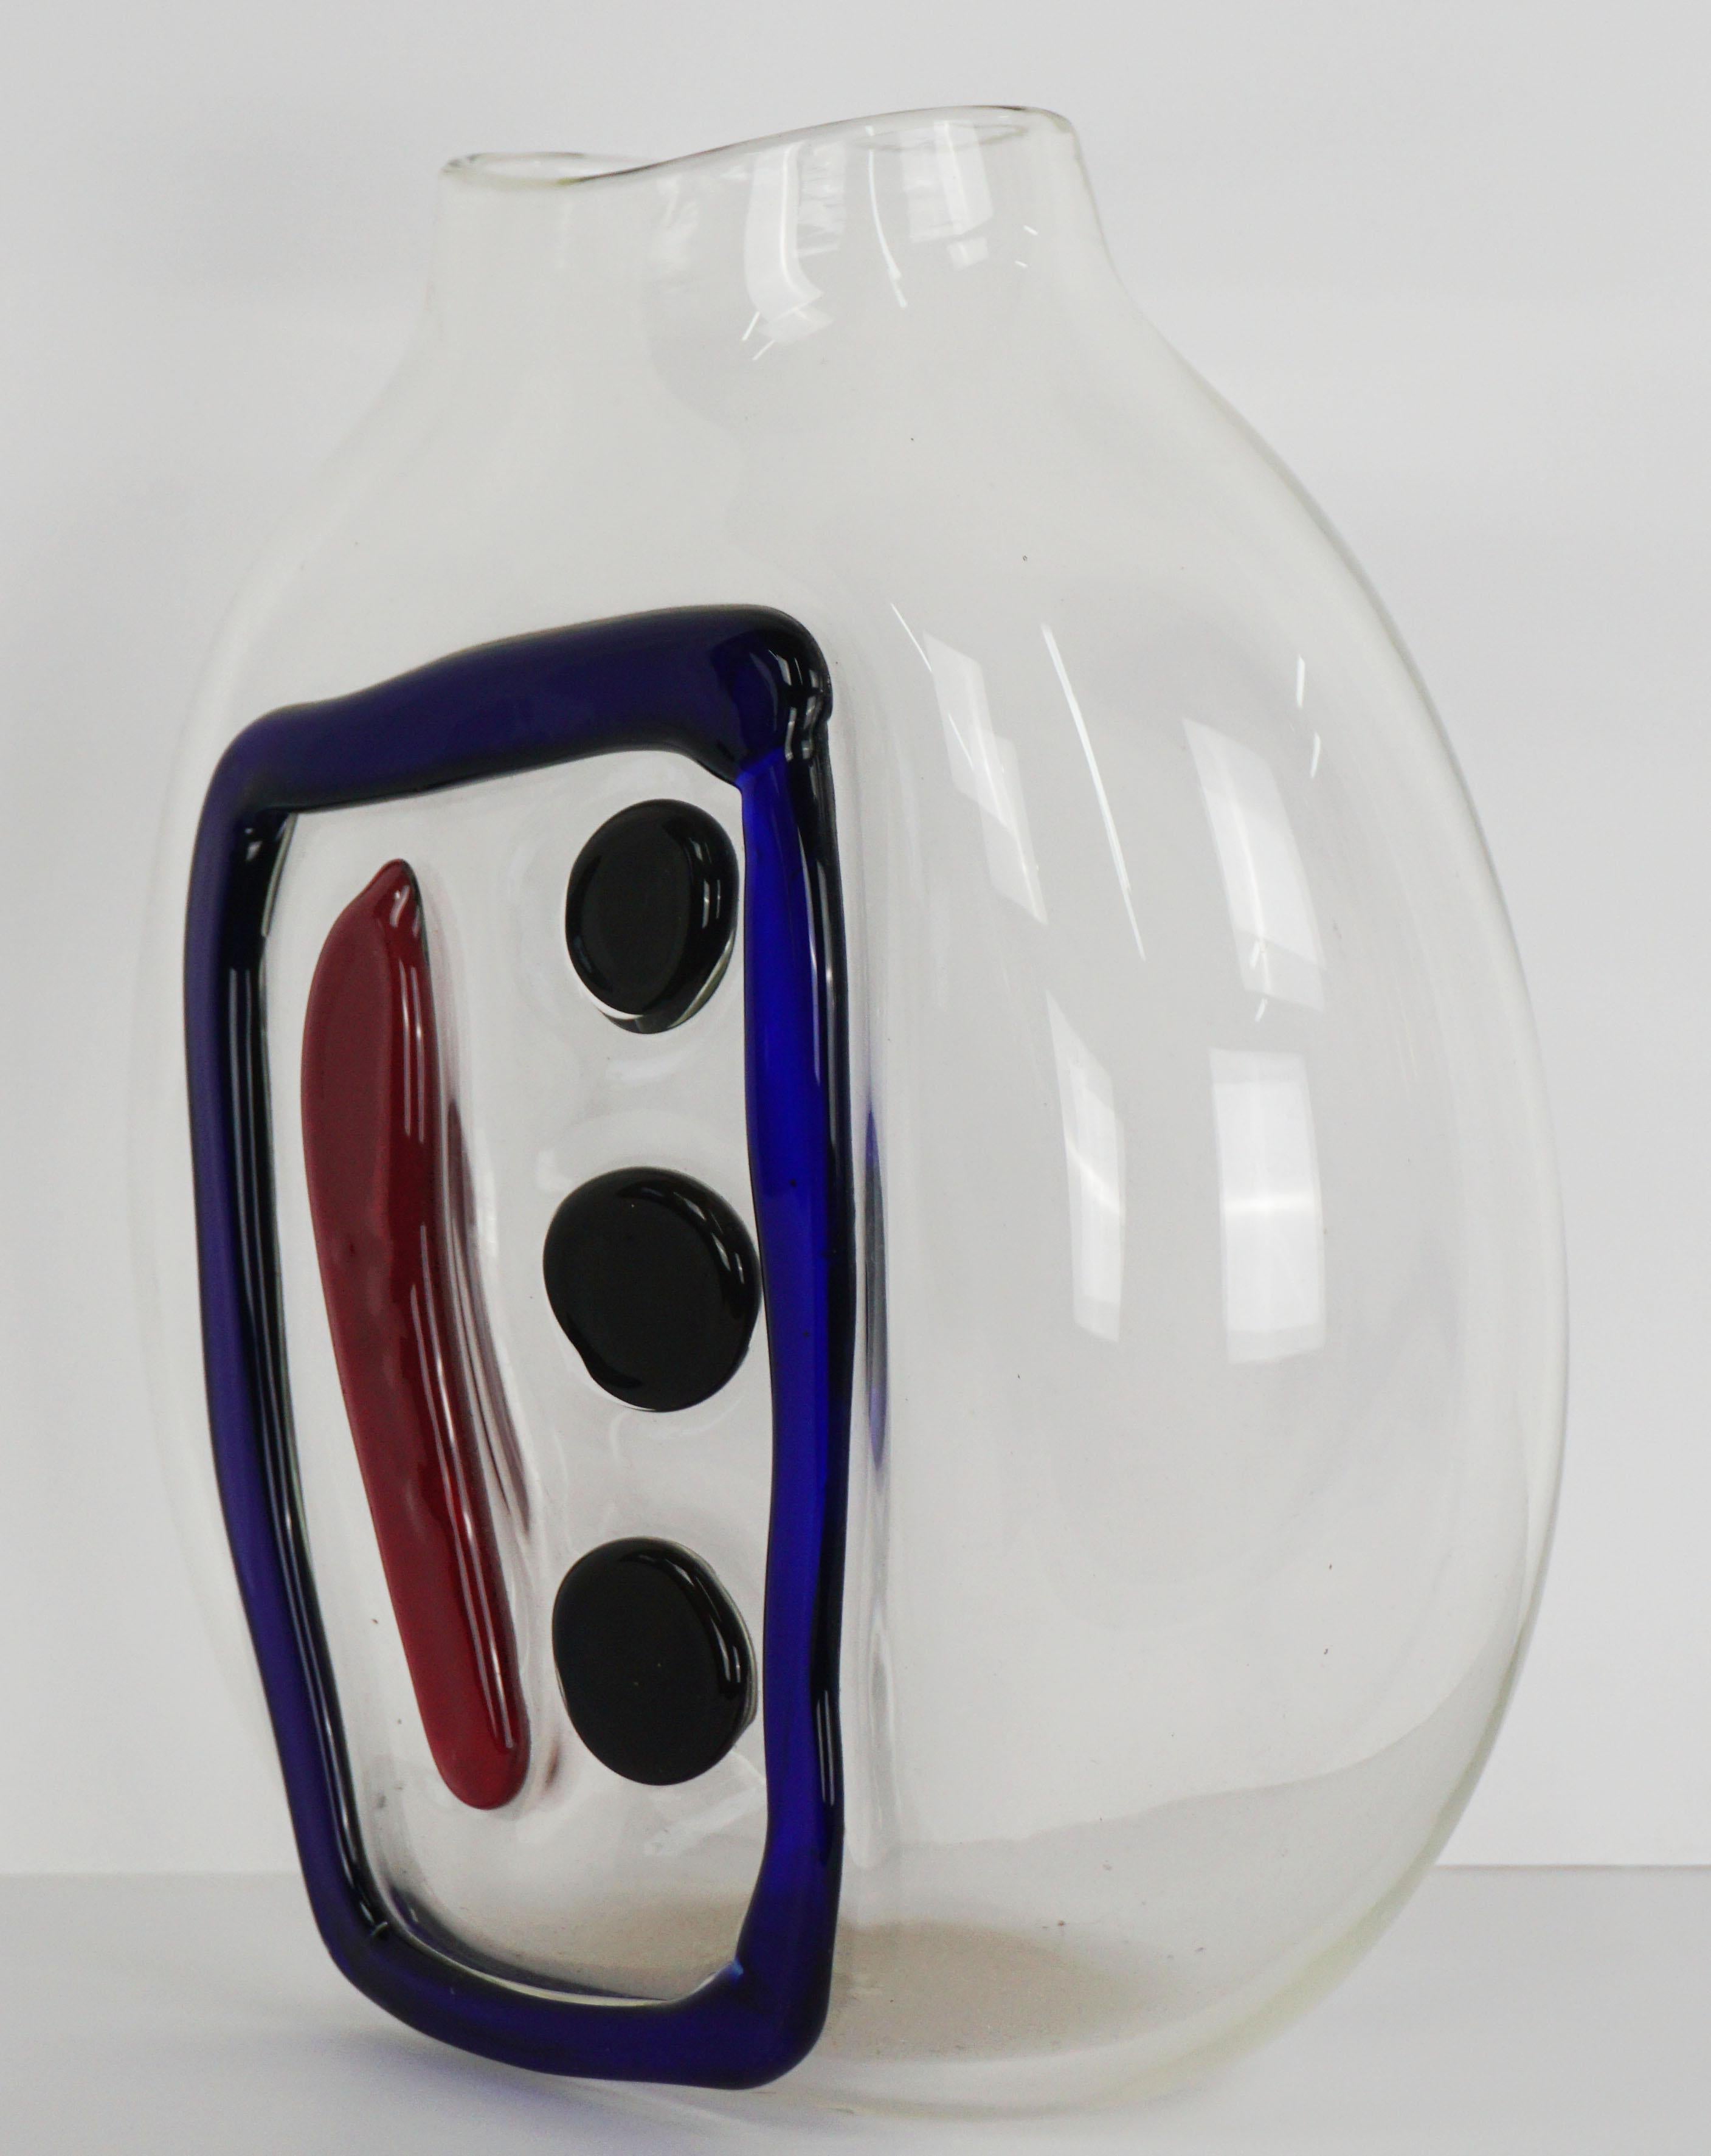 Wonderfully modern clear blown glass vase with boxed dash and three dots by Nadine Saylor (American, 20th Century), 2004. Signed and dated on bottom. Condition: Excellent. Measures 10.5